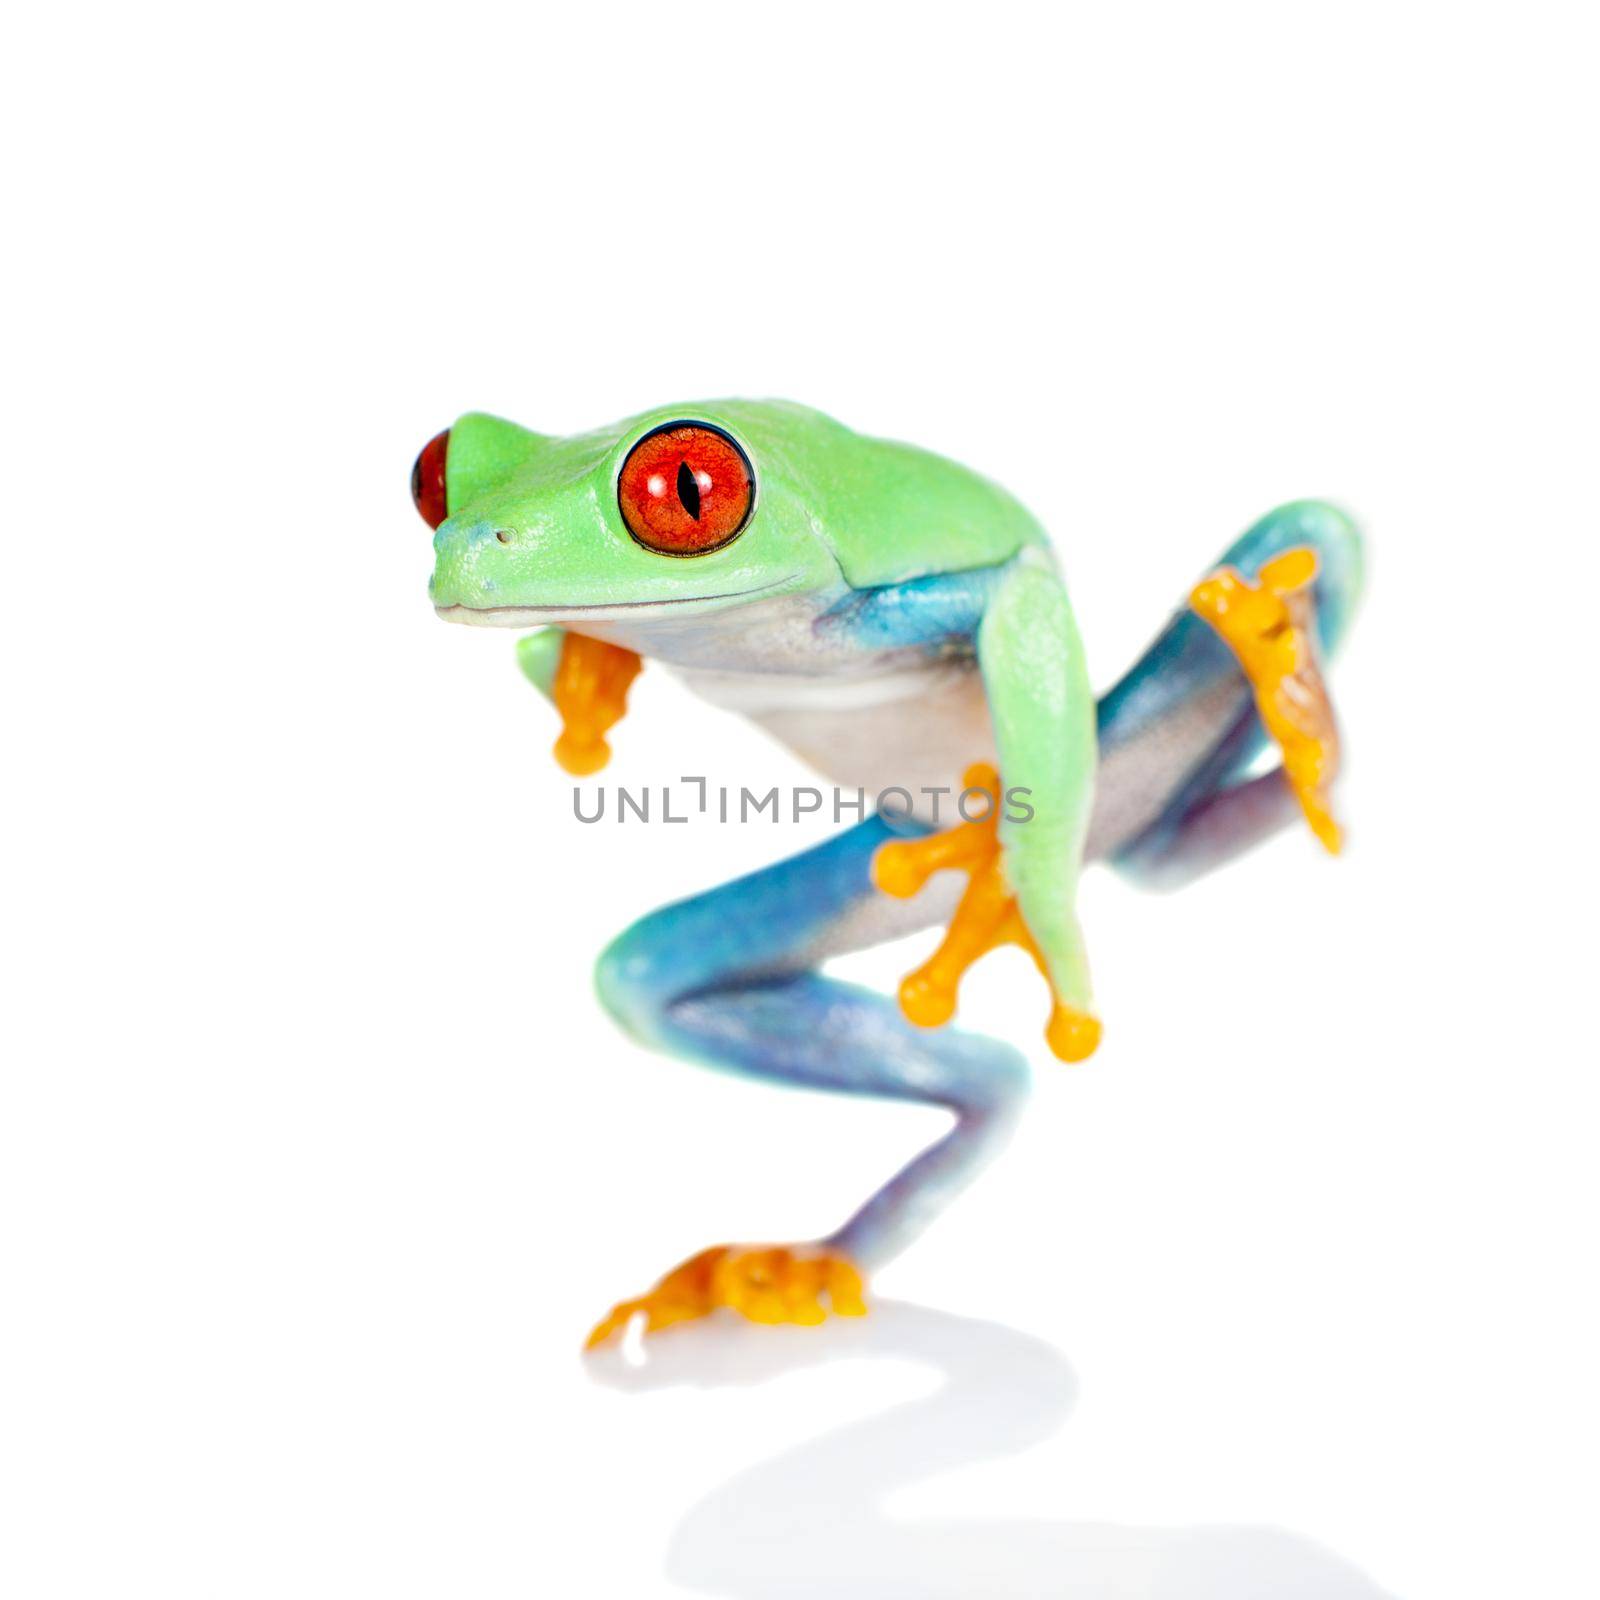 red eyed tree frog isolated on white. Agalychnis callidrias a tropical amphibian from the rain forest of Costa Rica and Panama. Beautiful jungle animal.